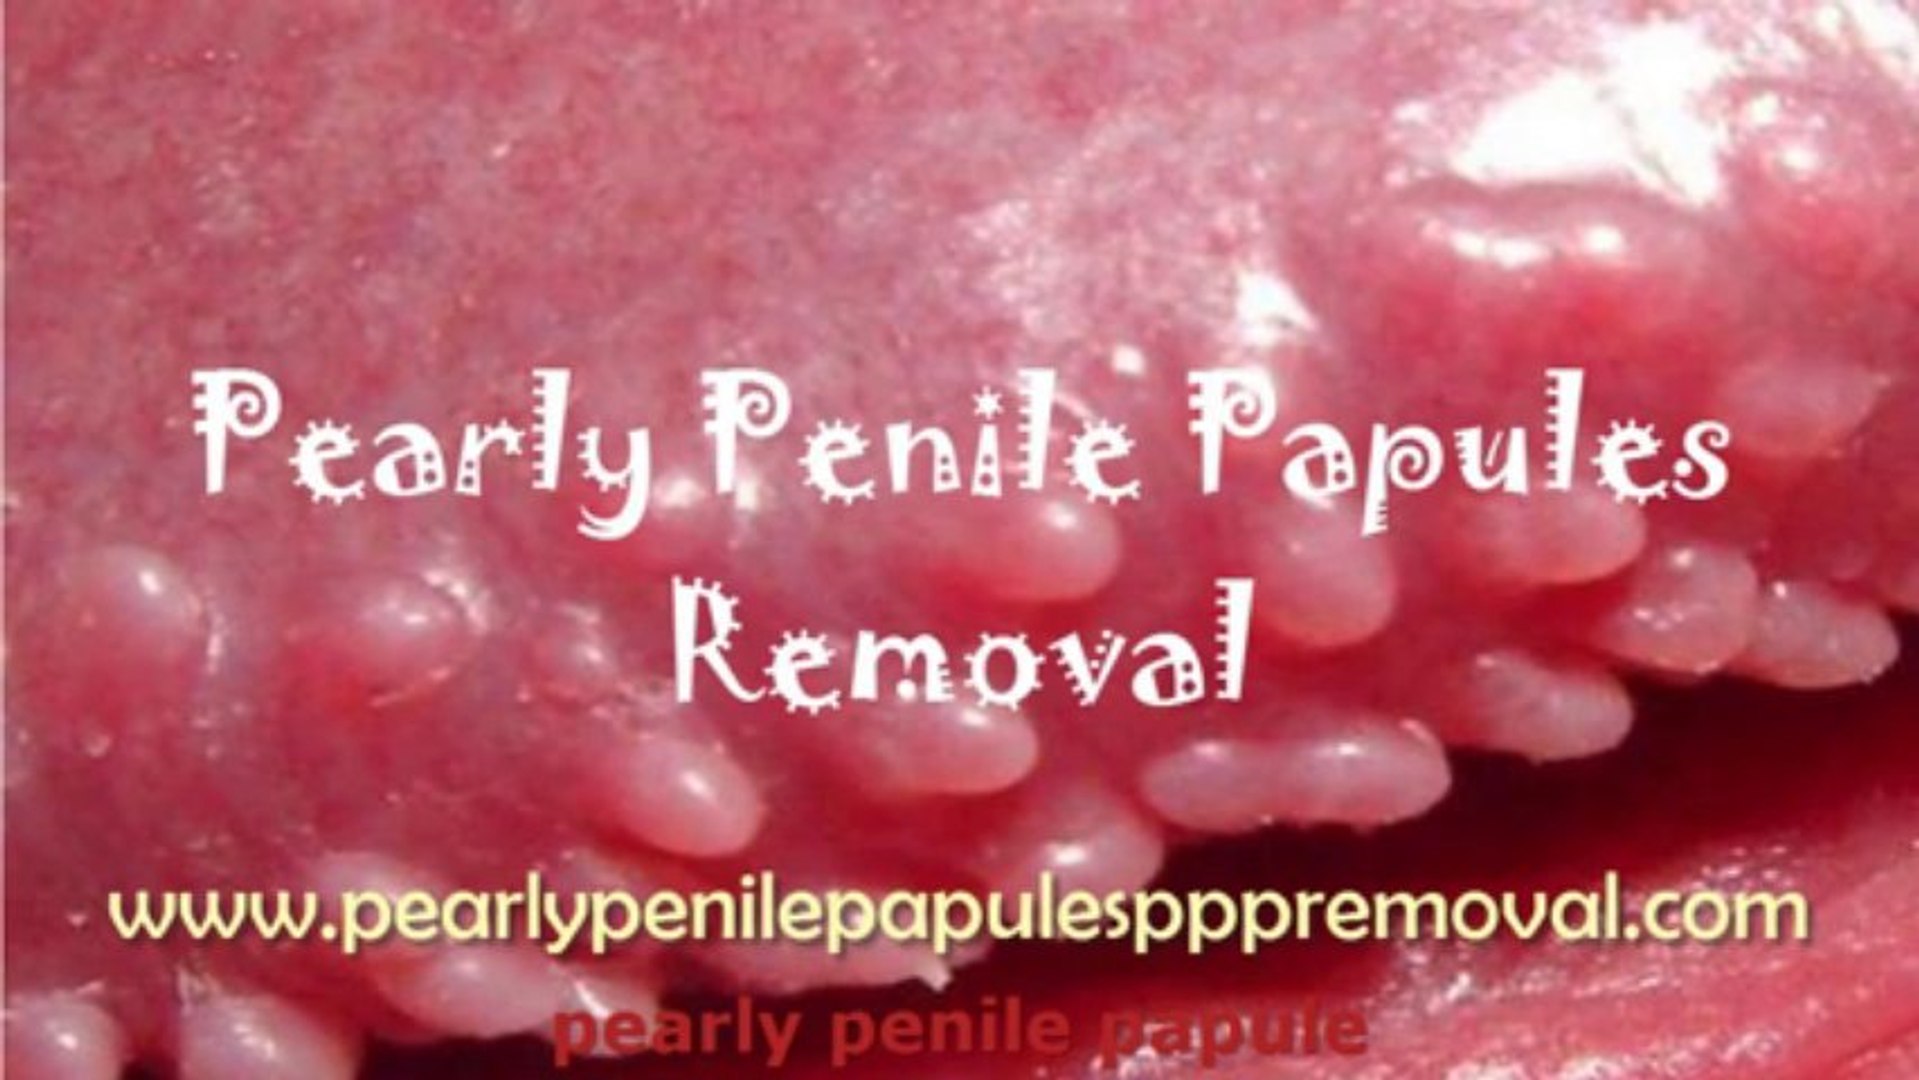 Papules cause penile pearly Pimple on